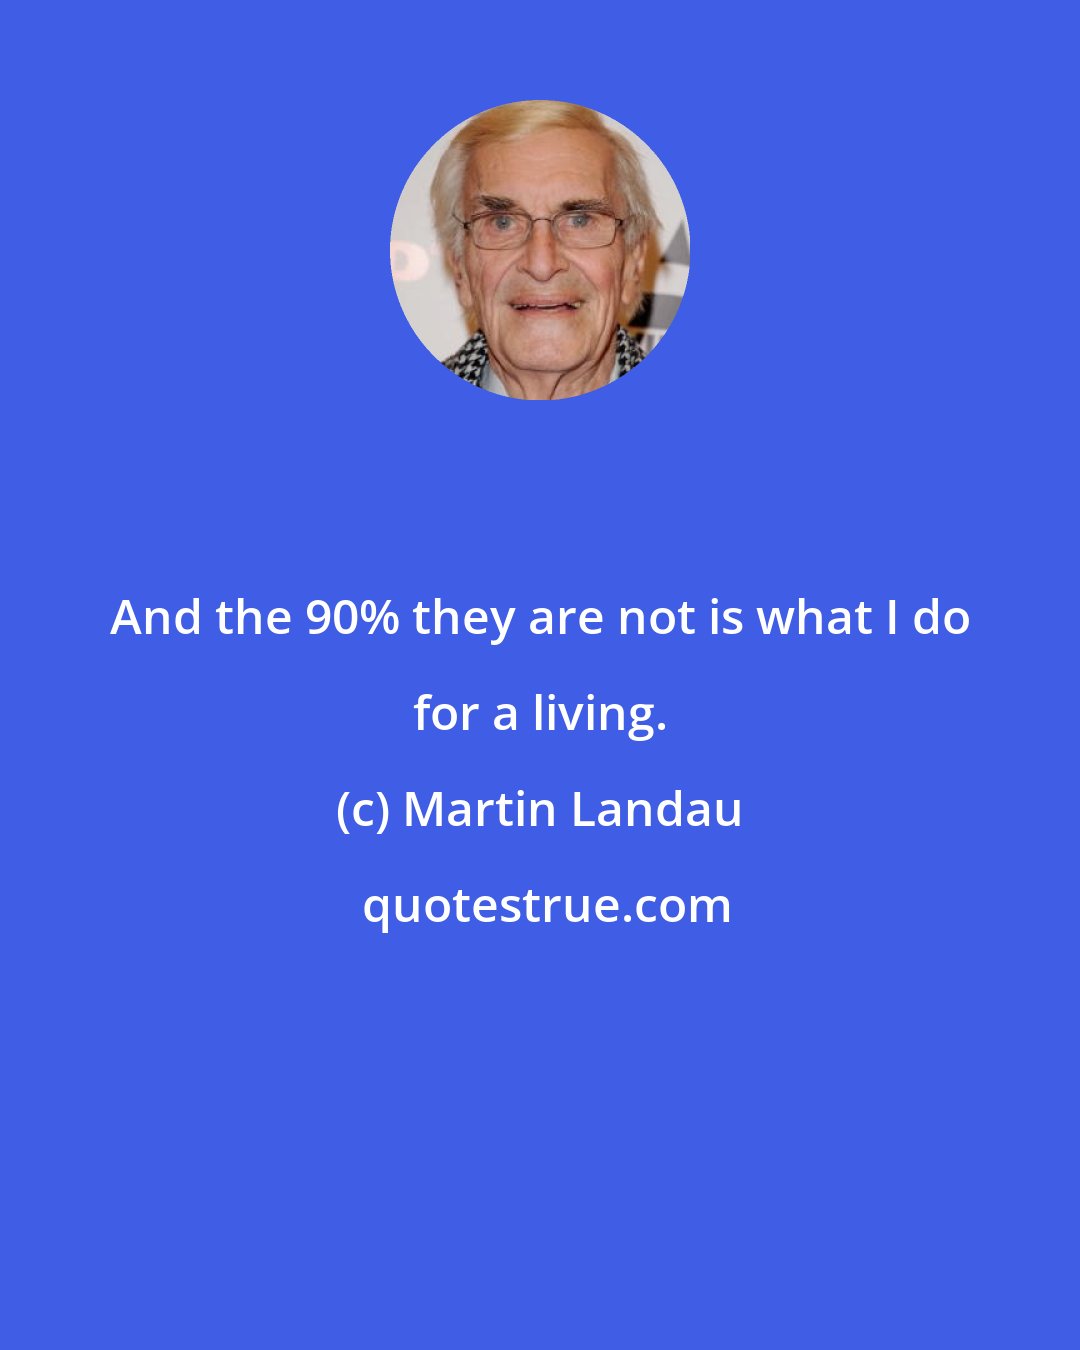 Martin Landau: And the 90% they are not is what I do for a living.